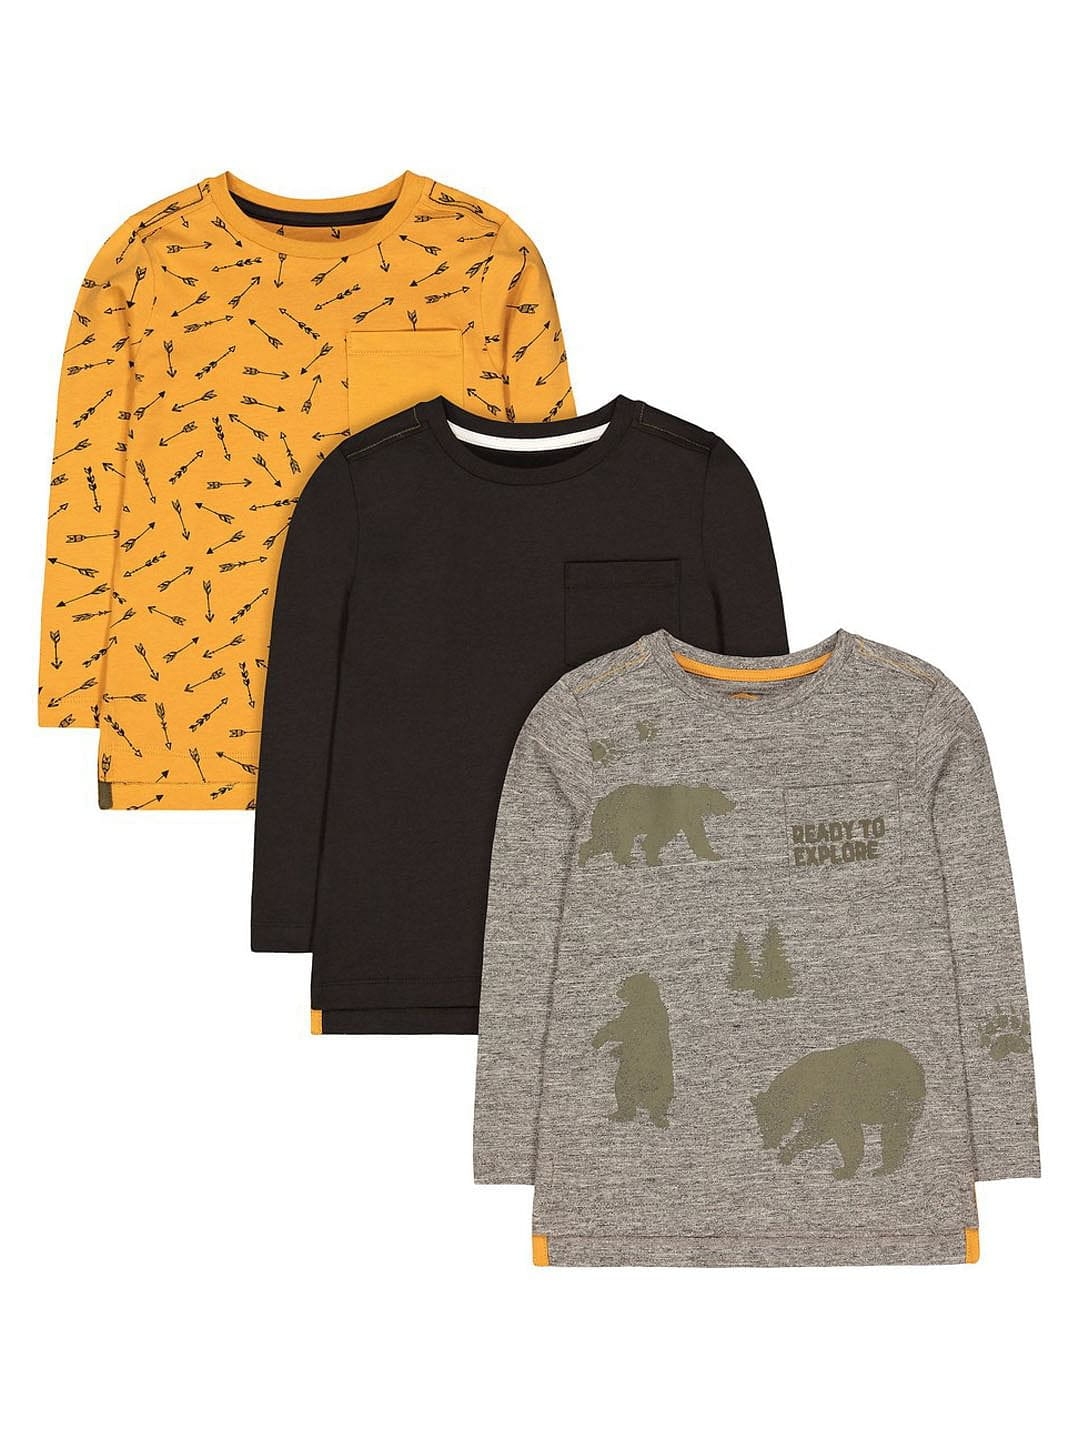 Mothercare | Grey Bear, Mustard Arrow and Charcoal T-Shirts - Pack of 3 0